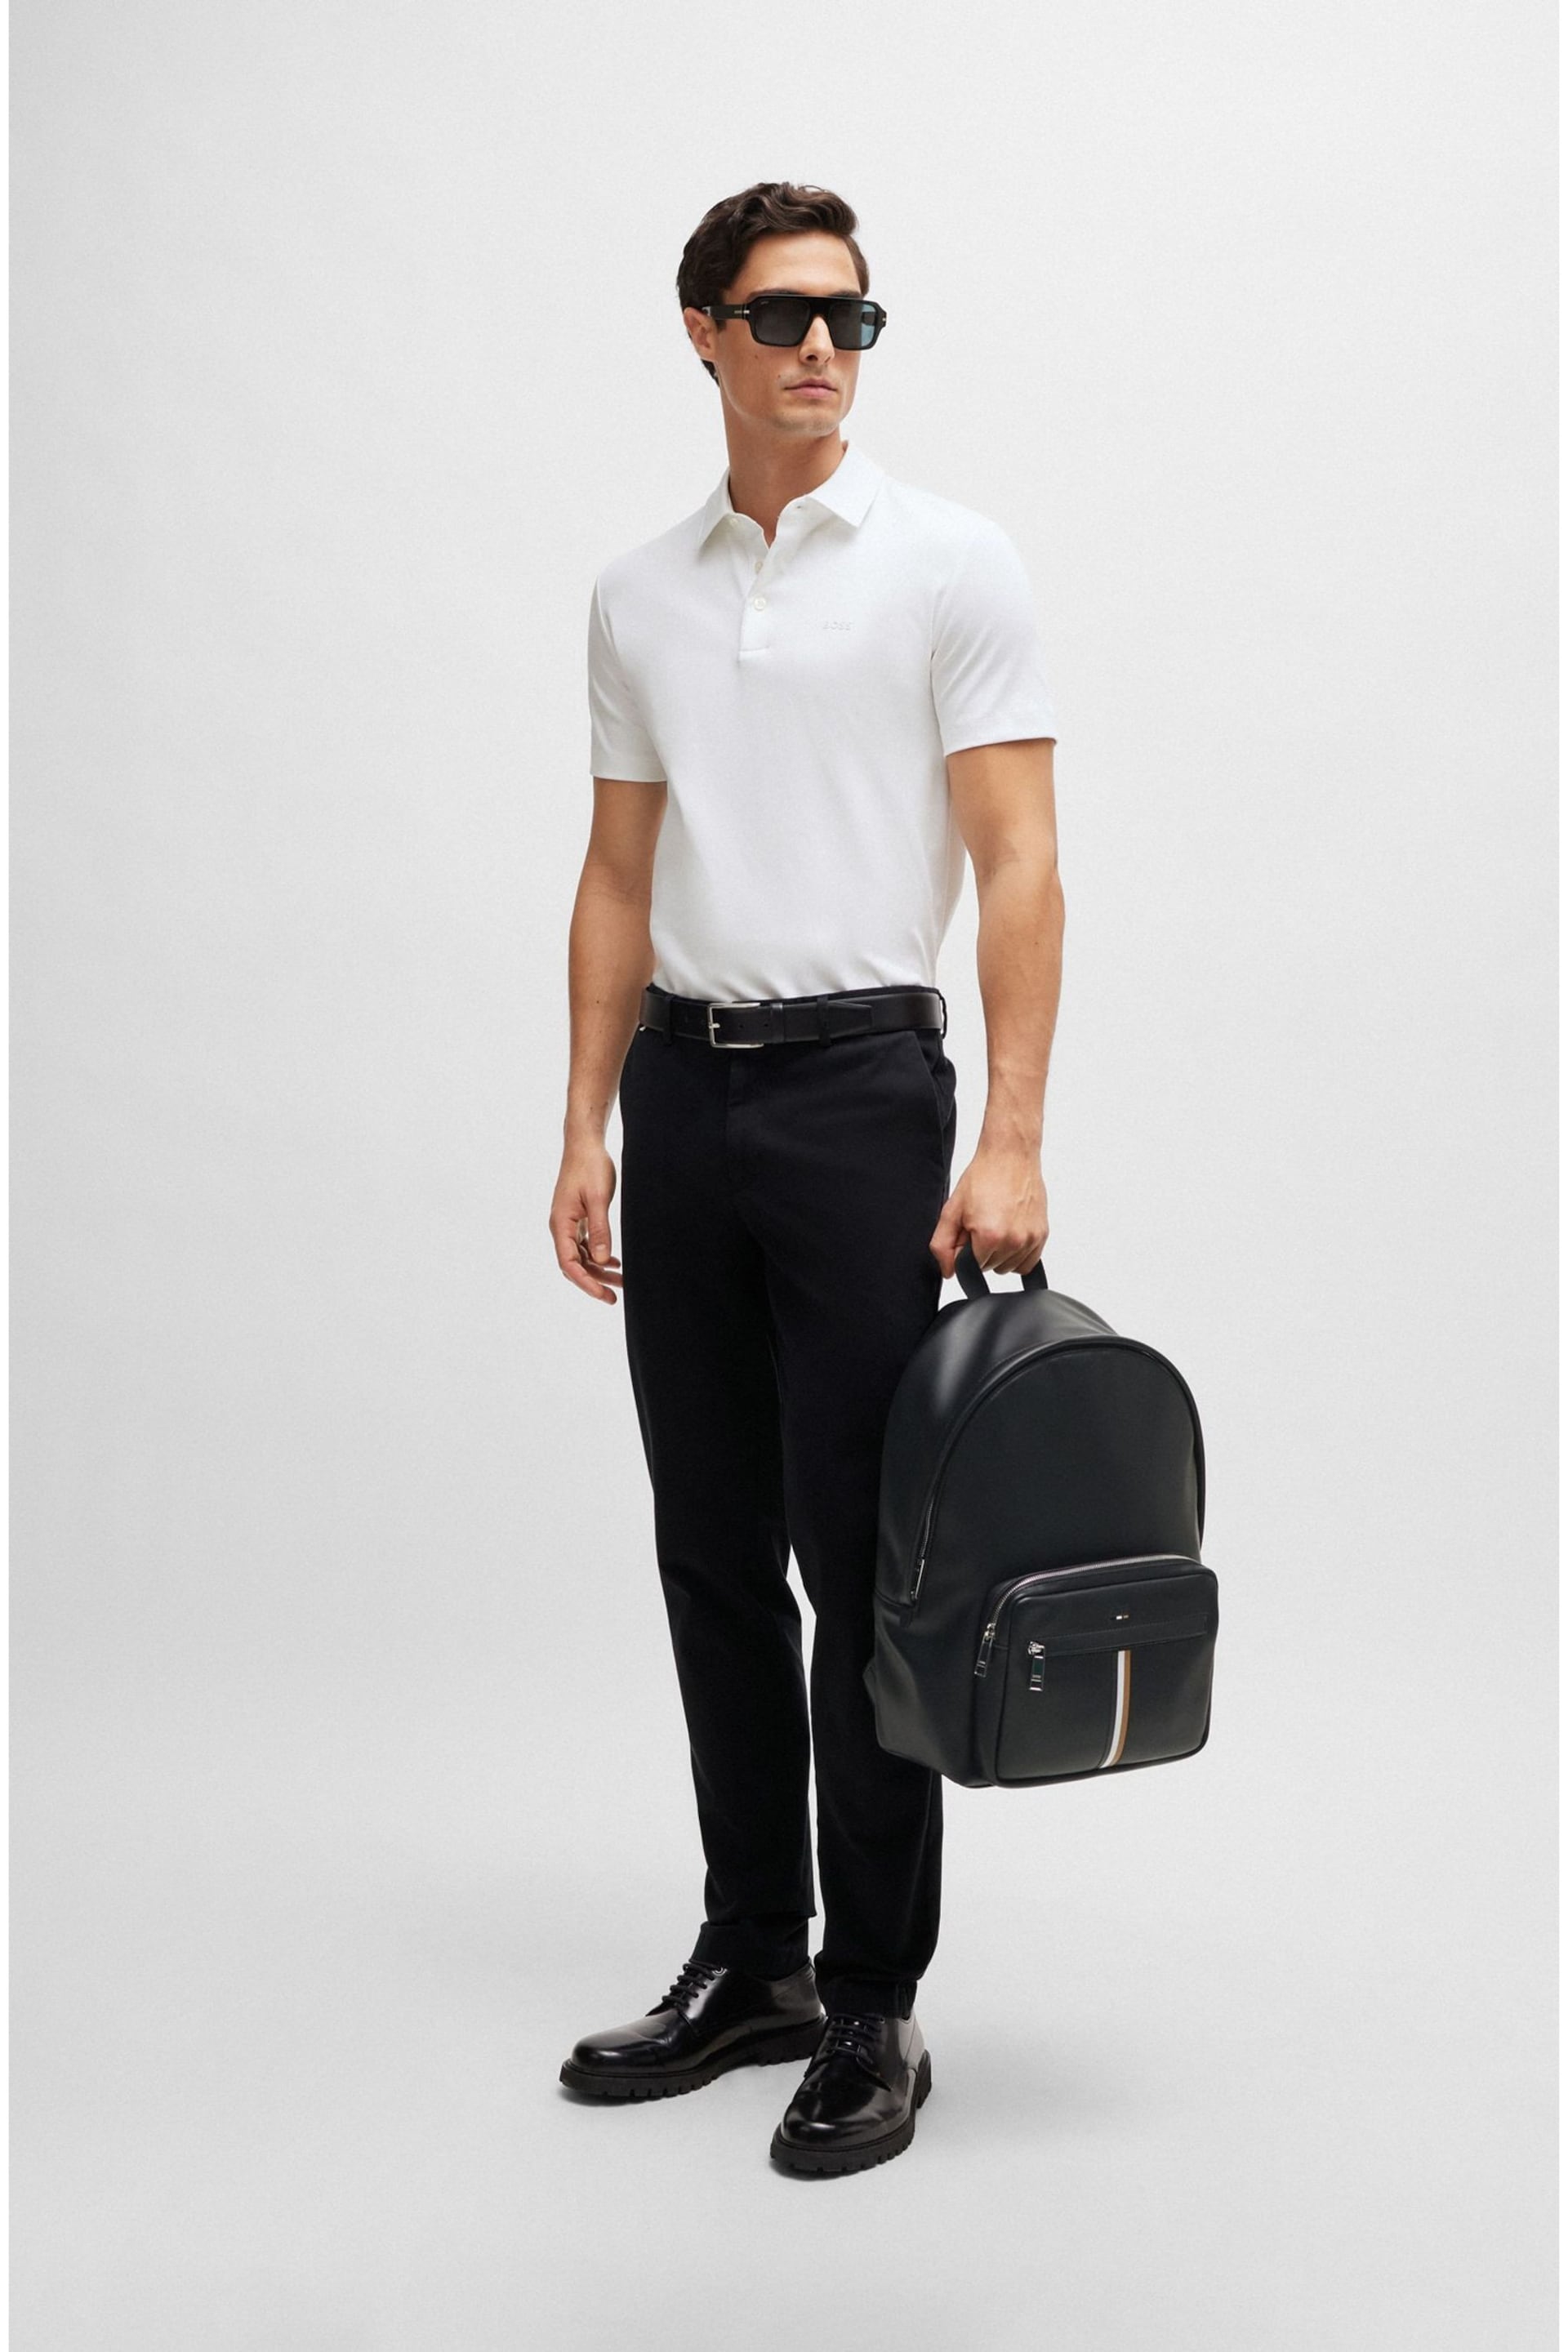 BOSS Black Signature Stripe Faux Leather Backpack - Image 2 of 4